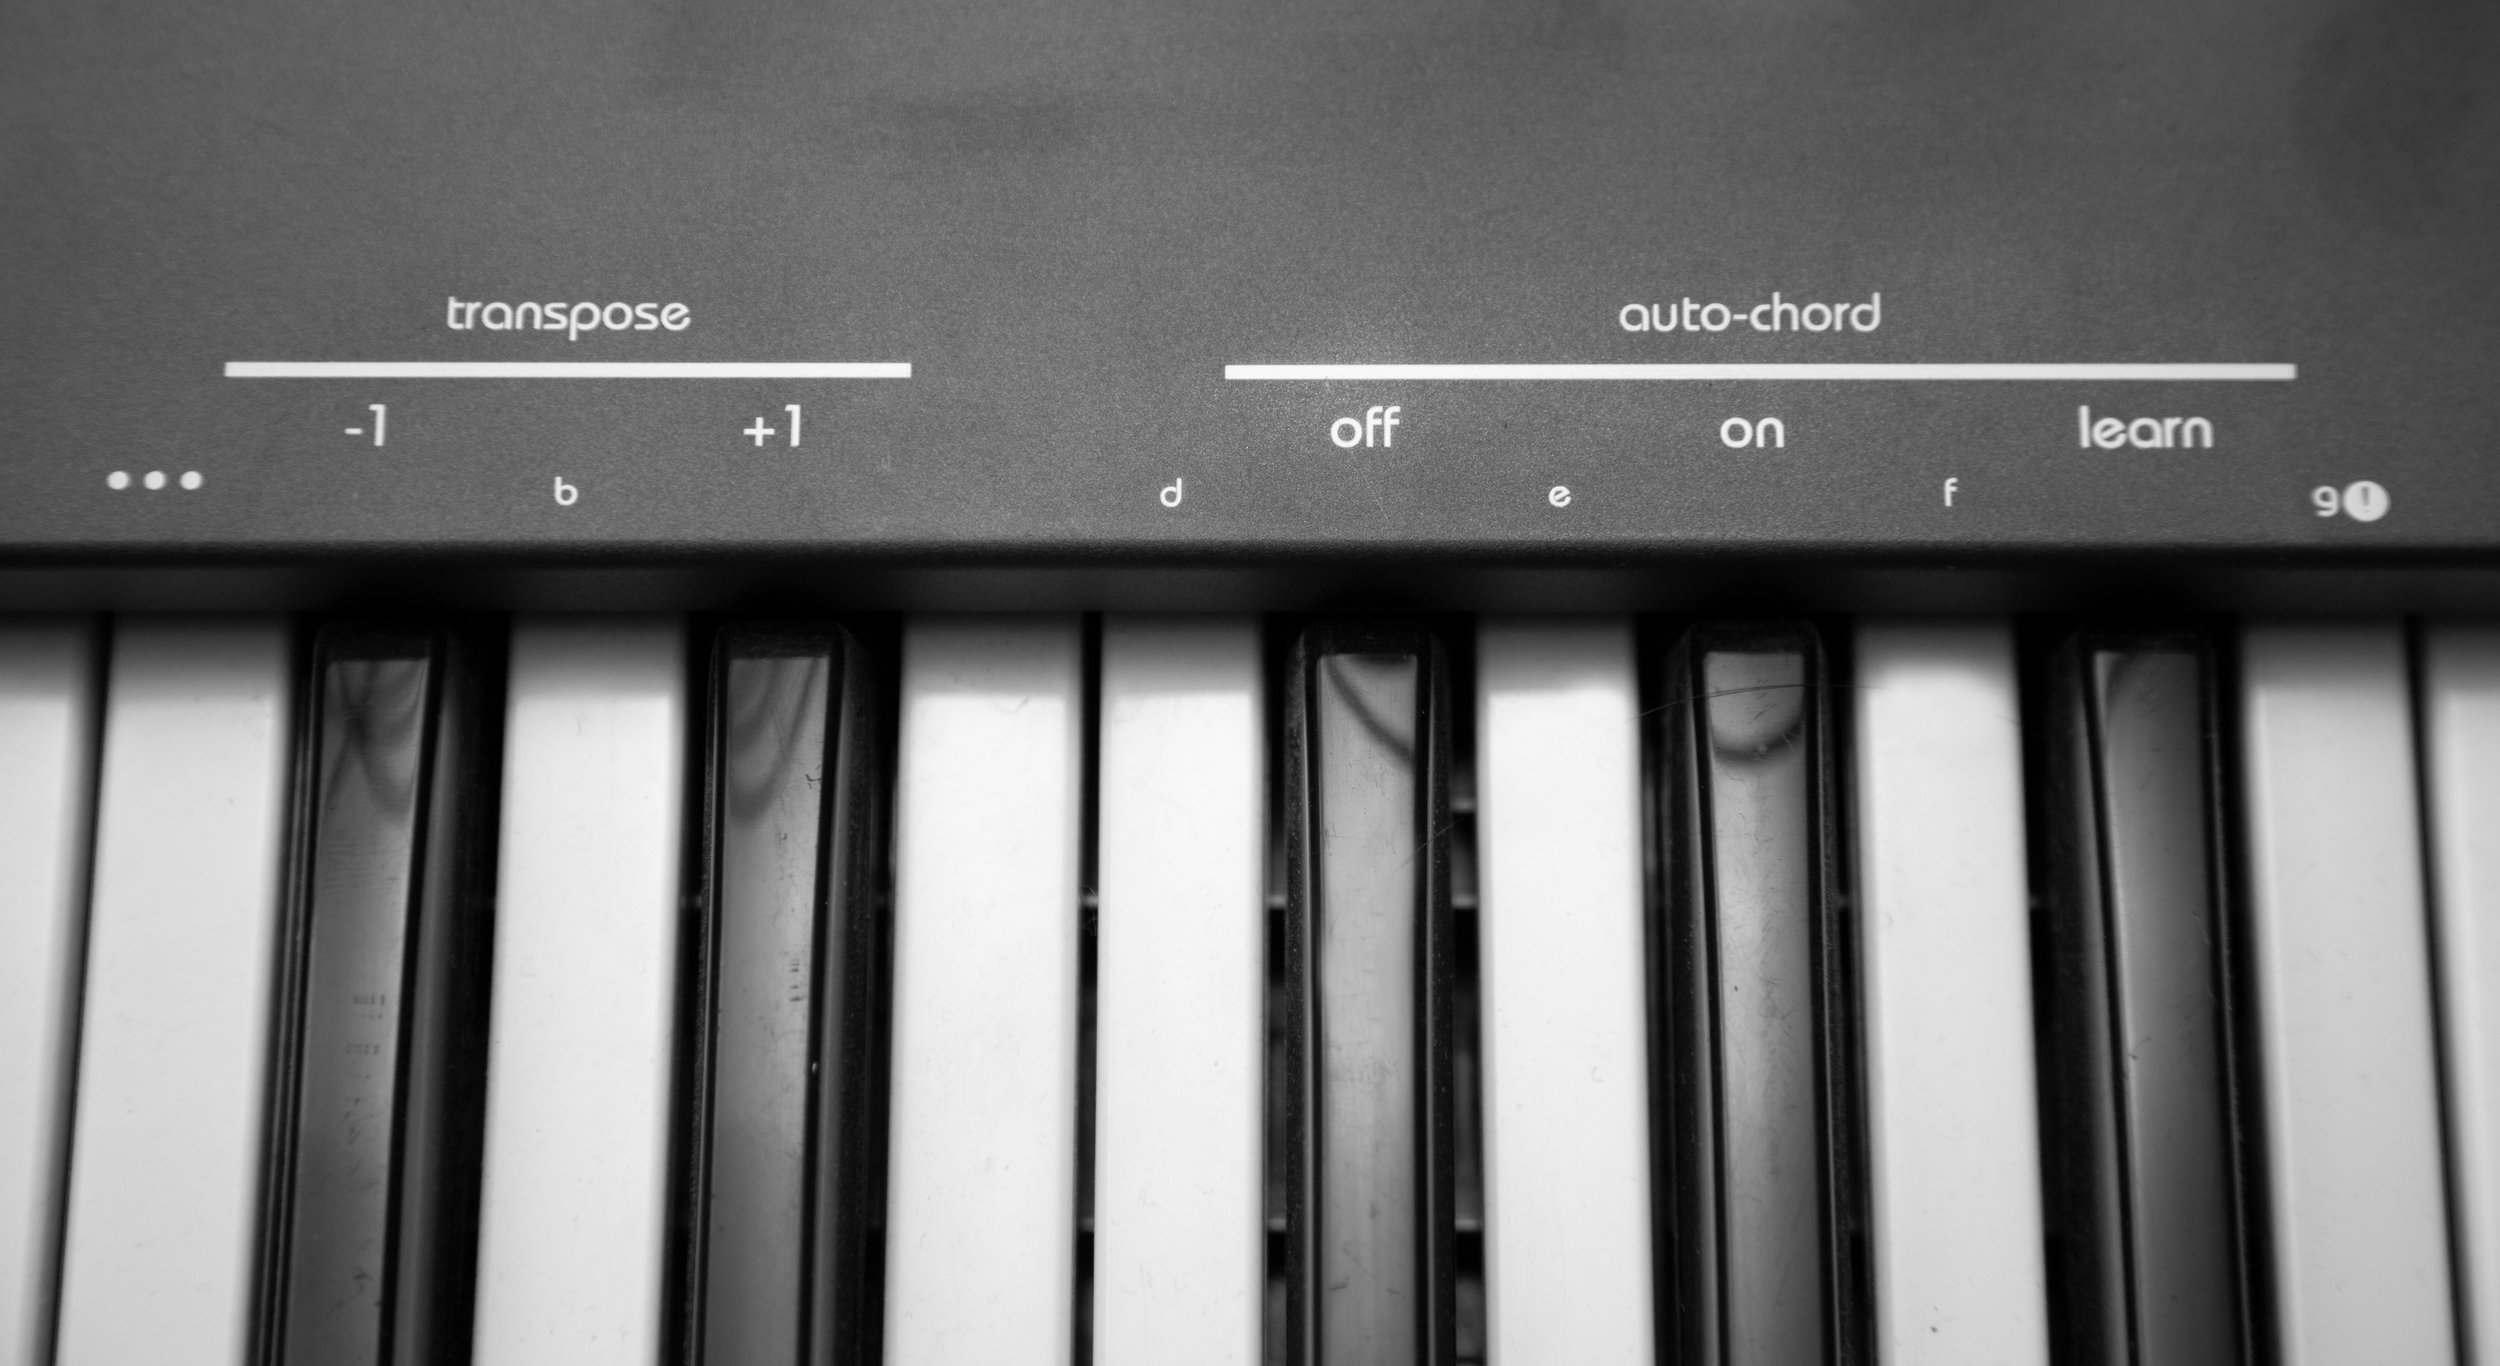  transpose and auto-chord controls 